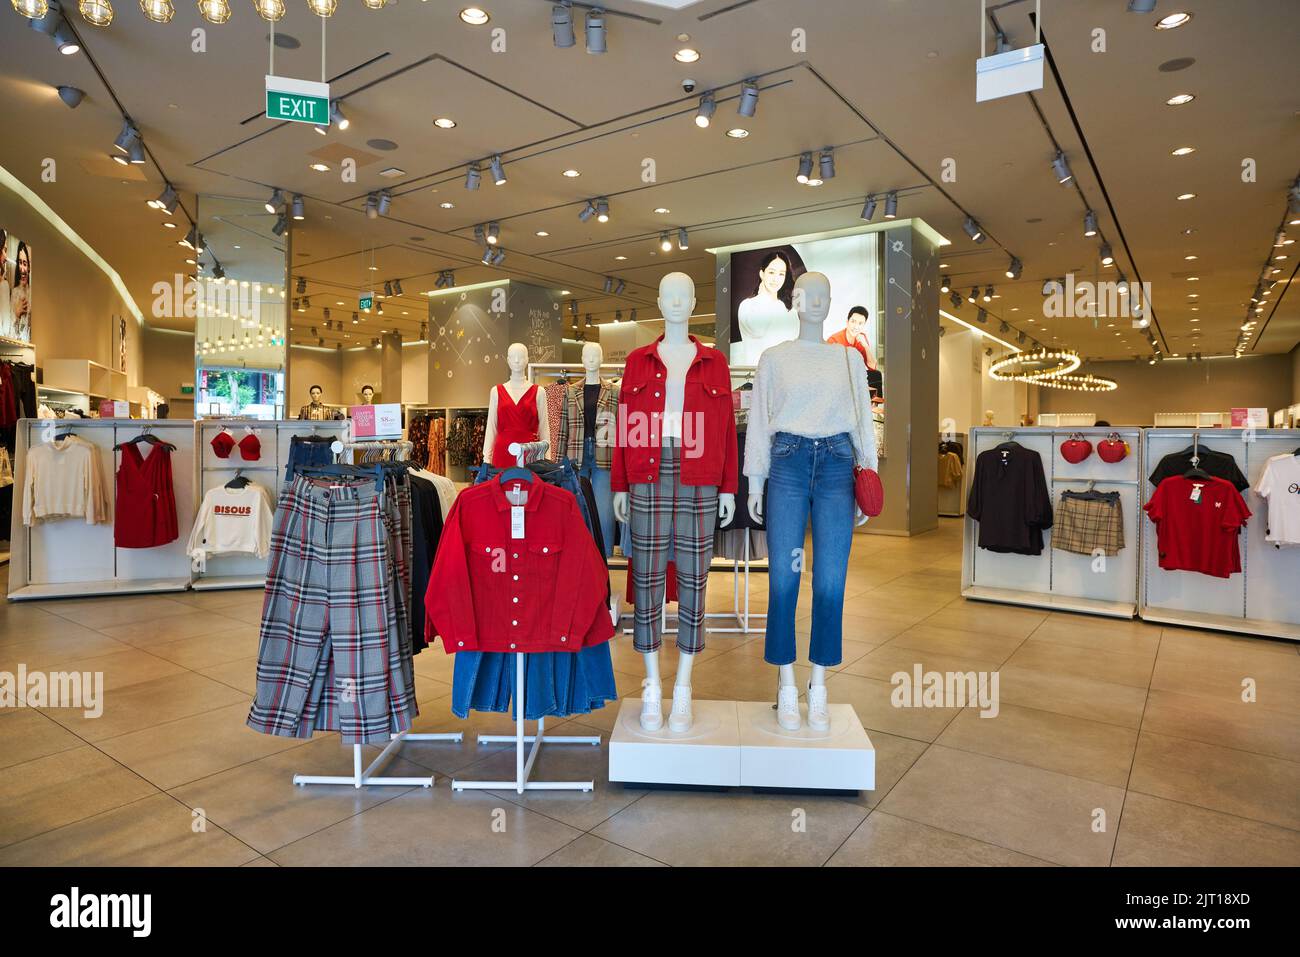 SINGAPORE - JANUARY 19, 2020: interior shot of H&M store in Singapore. H&M is a Swedish multinational clothing-retail company known for its fast-fashi Stock Photo